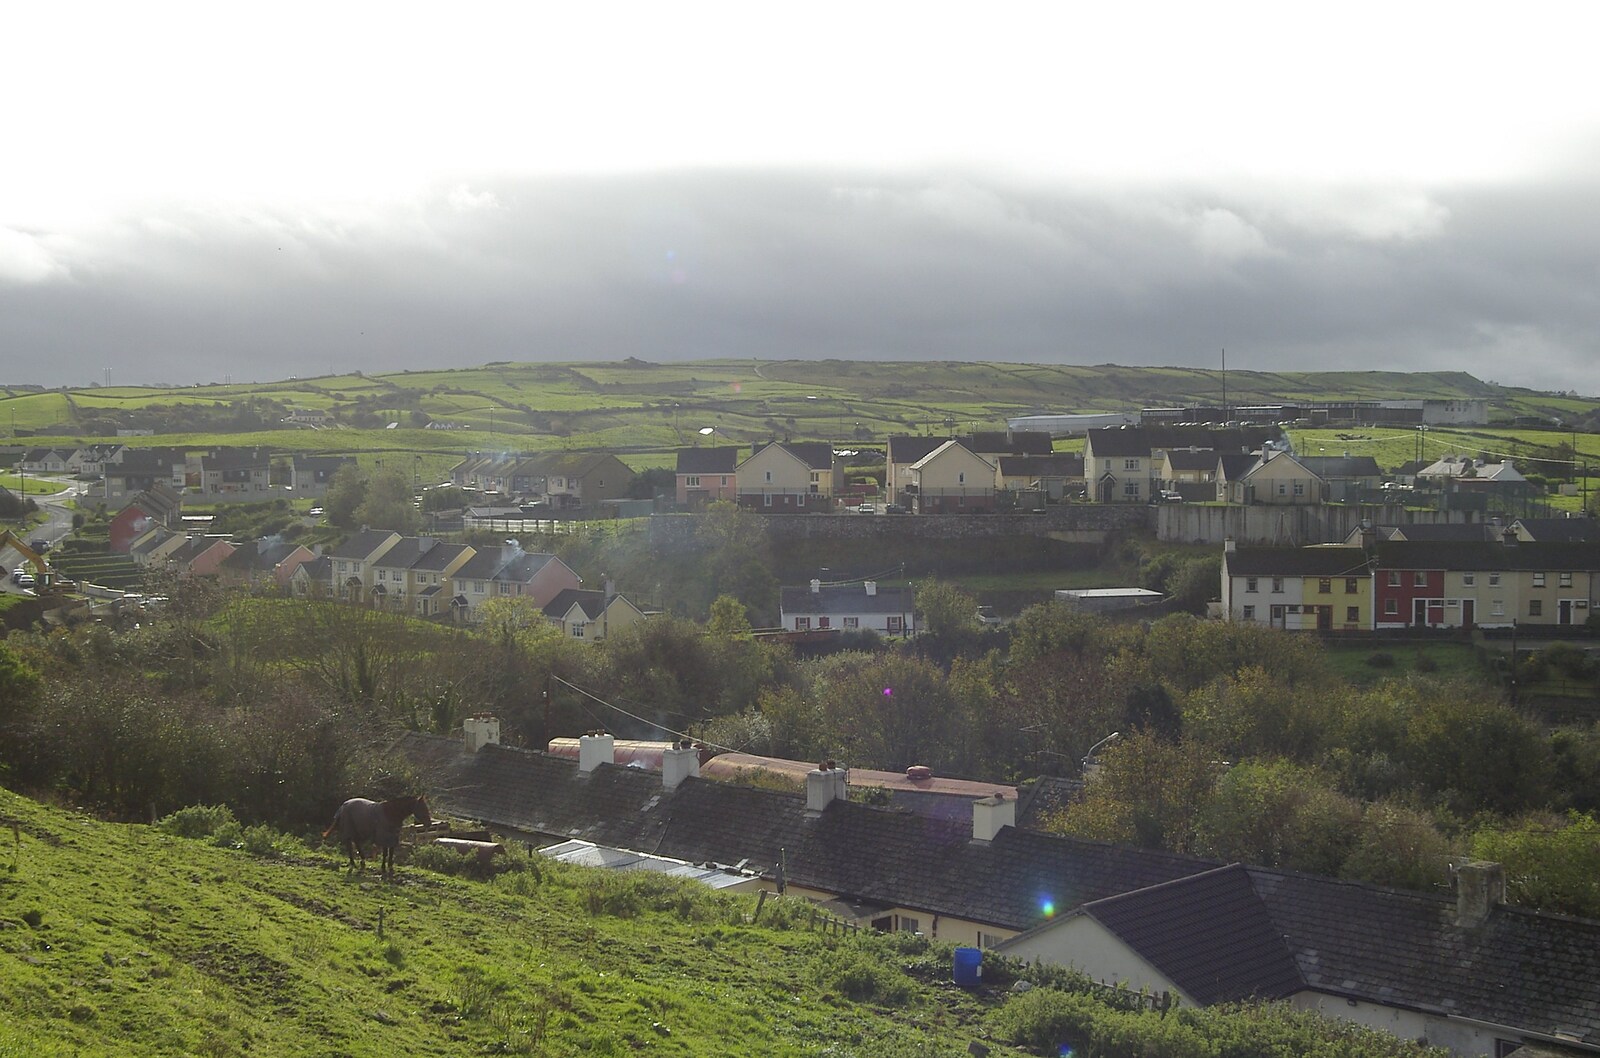 Rows of houses from Corofin, Ennistymon and The Burran, County Clare, Western Ireland - 27th October 2006